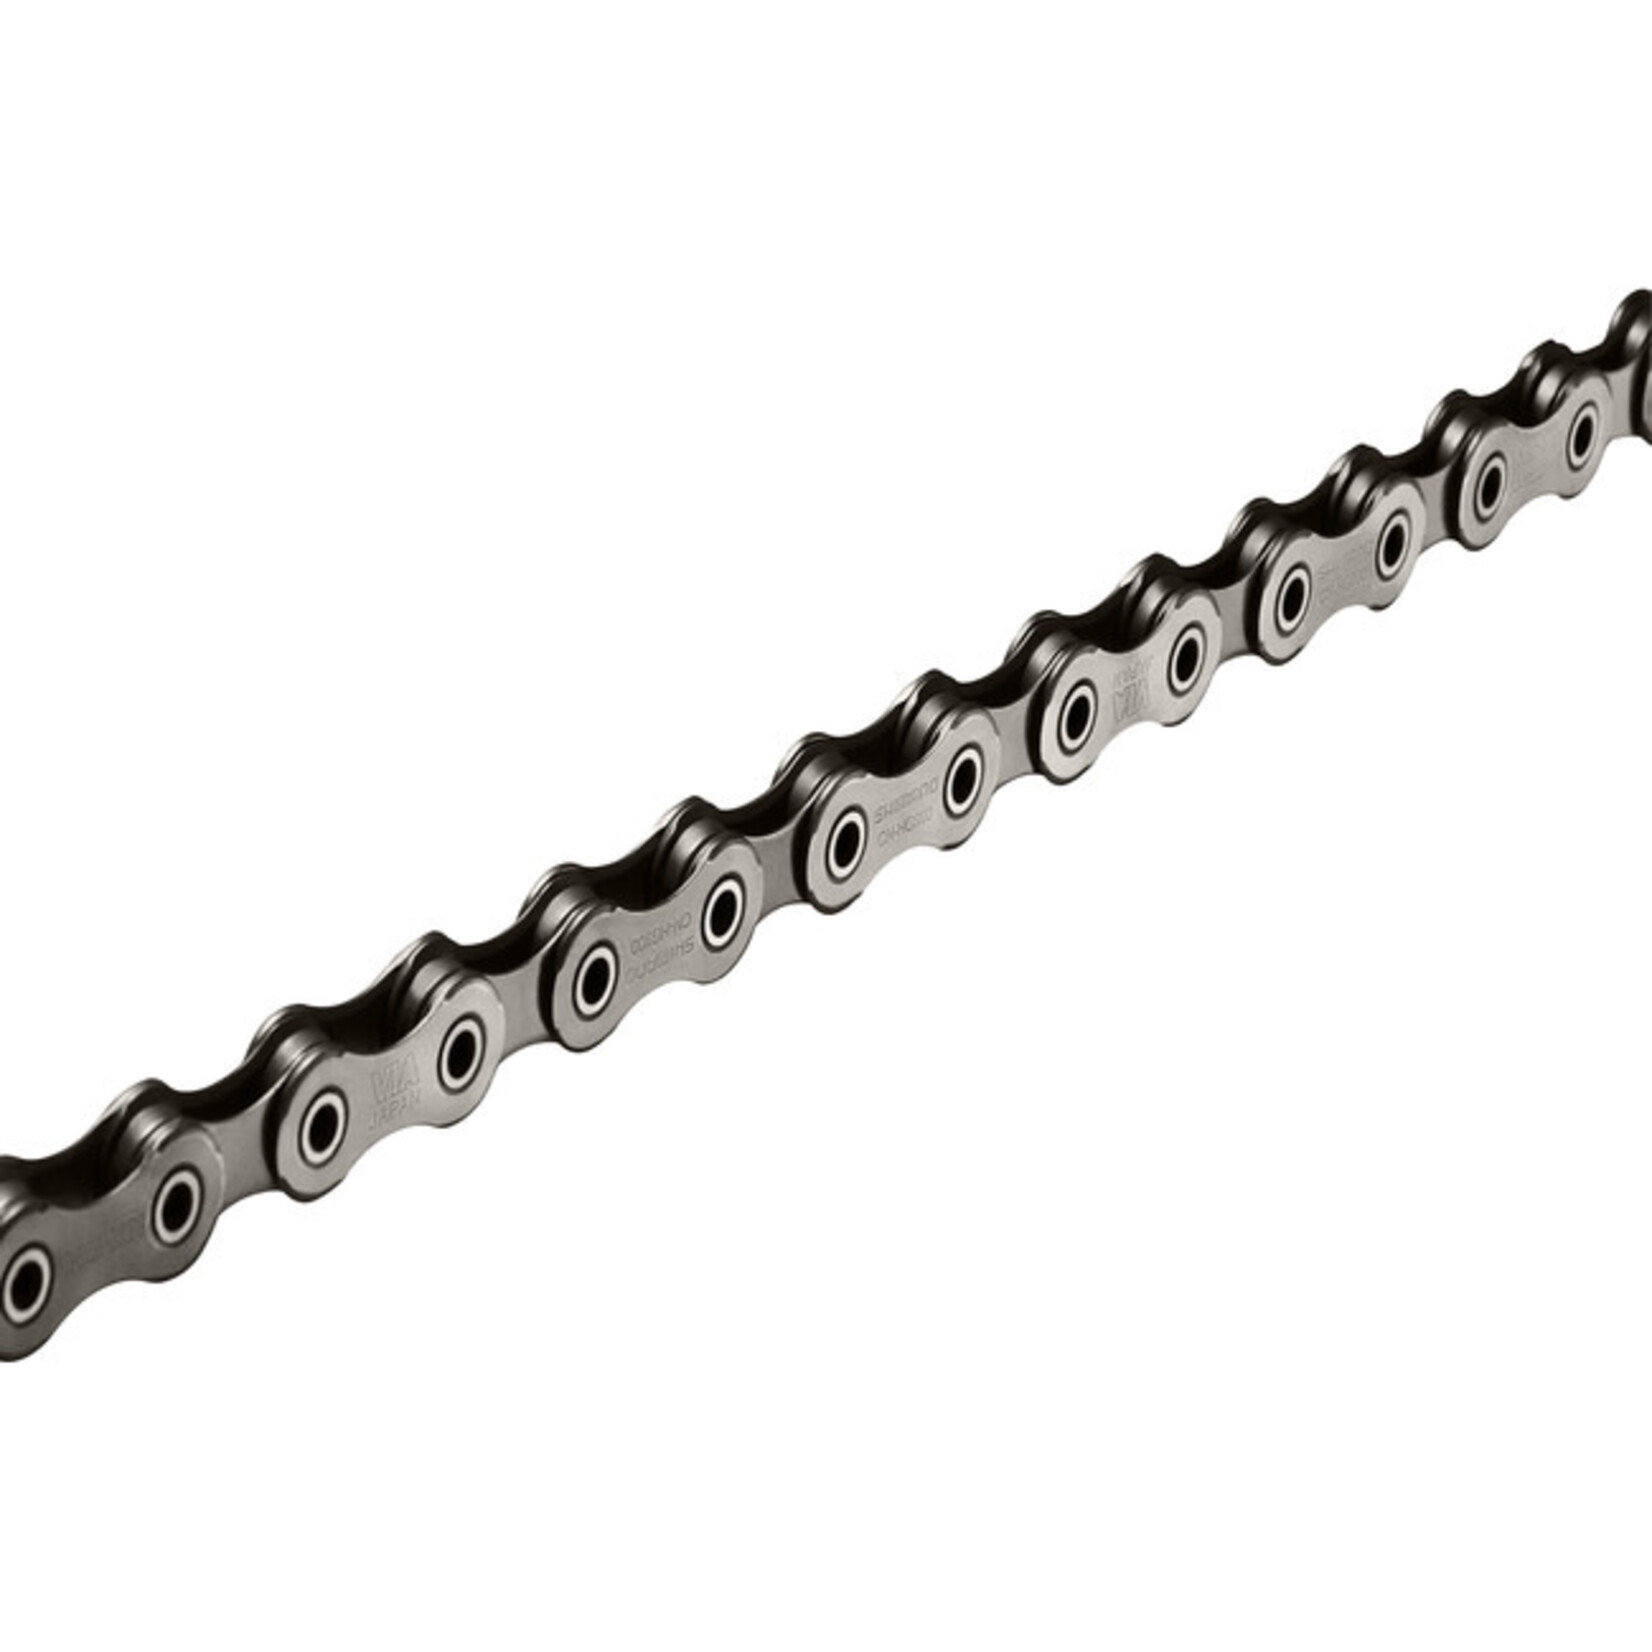 BICYCLE CHAIN, CN-HG901-11, FOR 11-SPEED (ROAD/MTB/E-BIKE COMPATIBLE), 116 LINKS (W/QUICK LINK, SM-CN900-11)